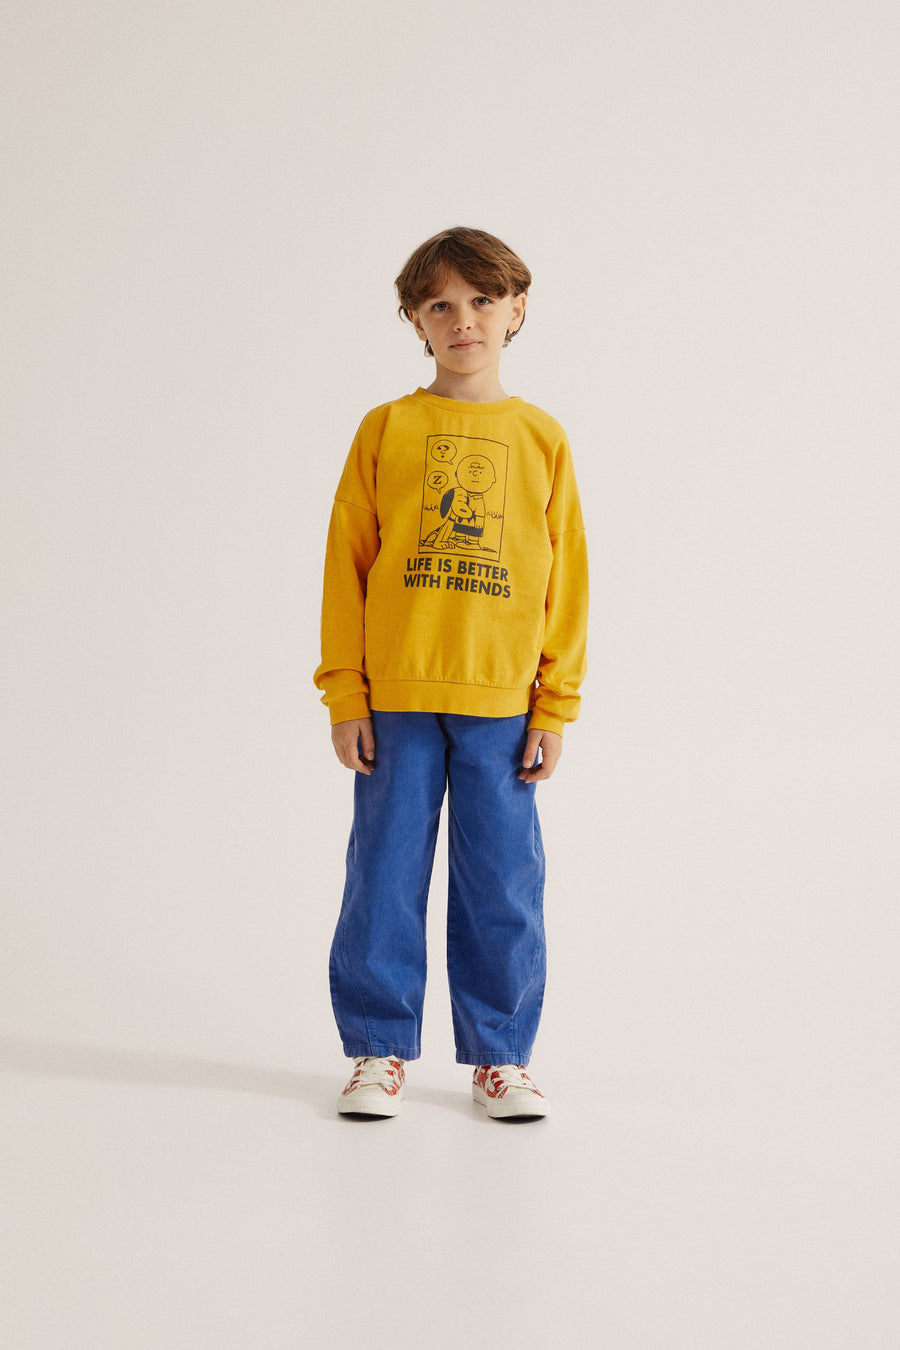 The Campamento - Blue washed kids trousers - Blue